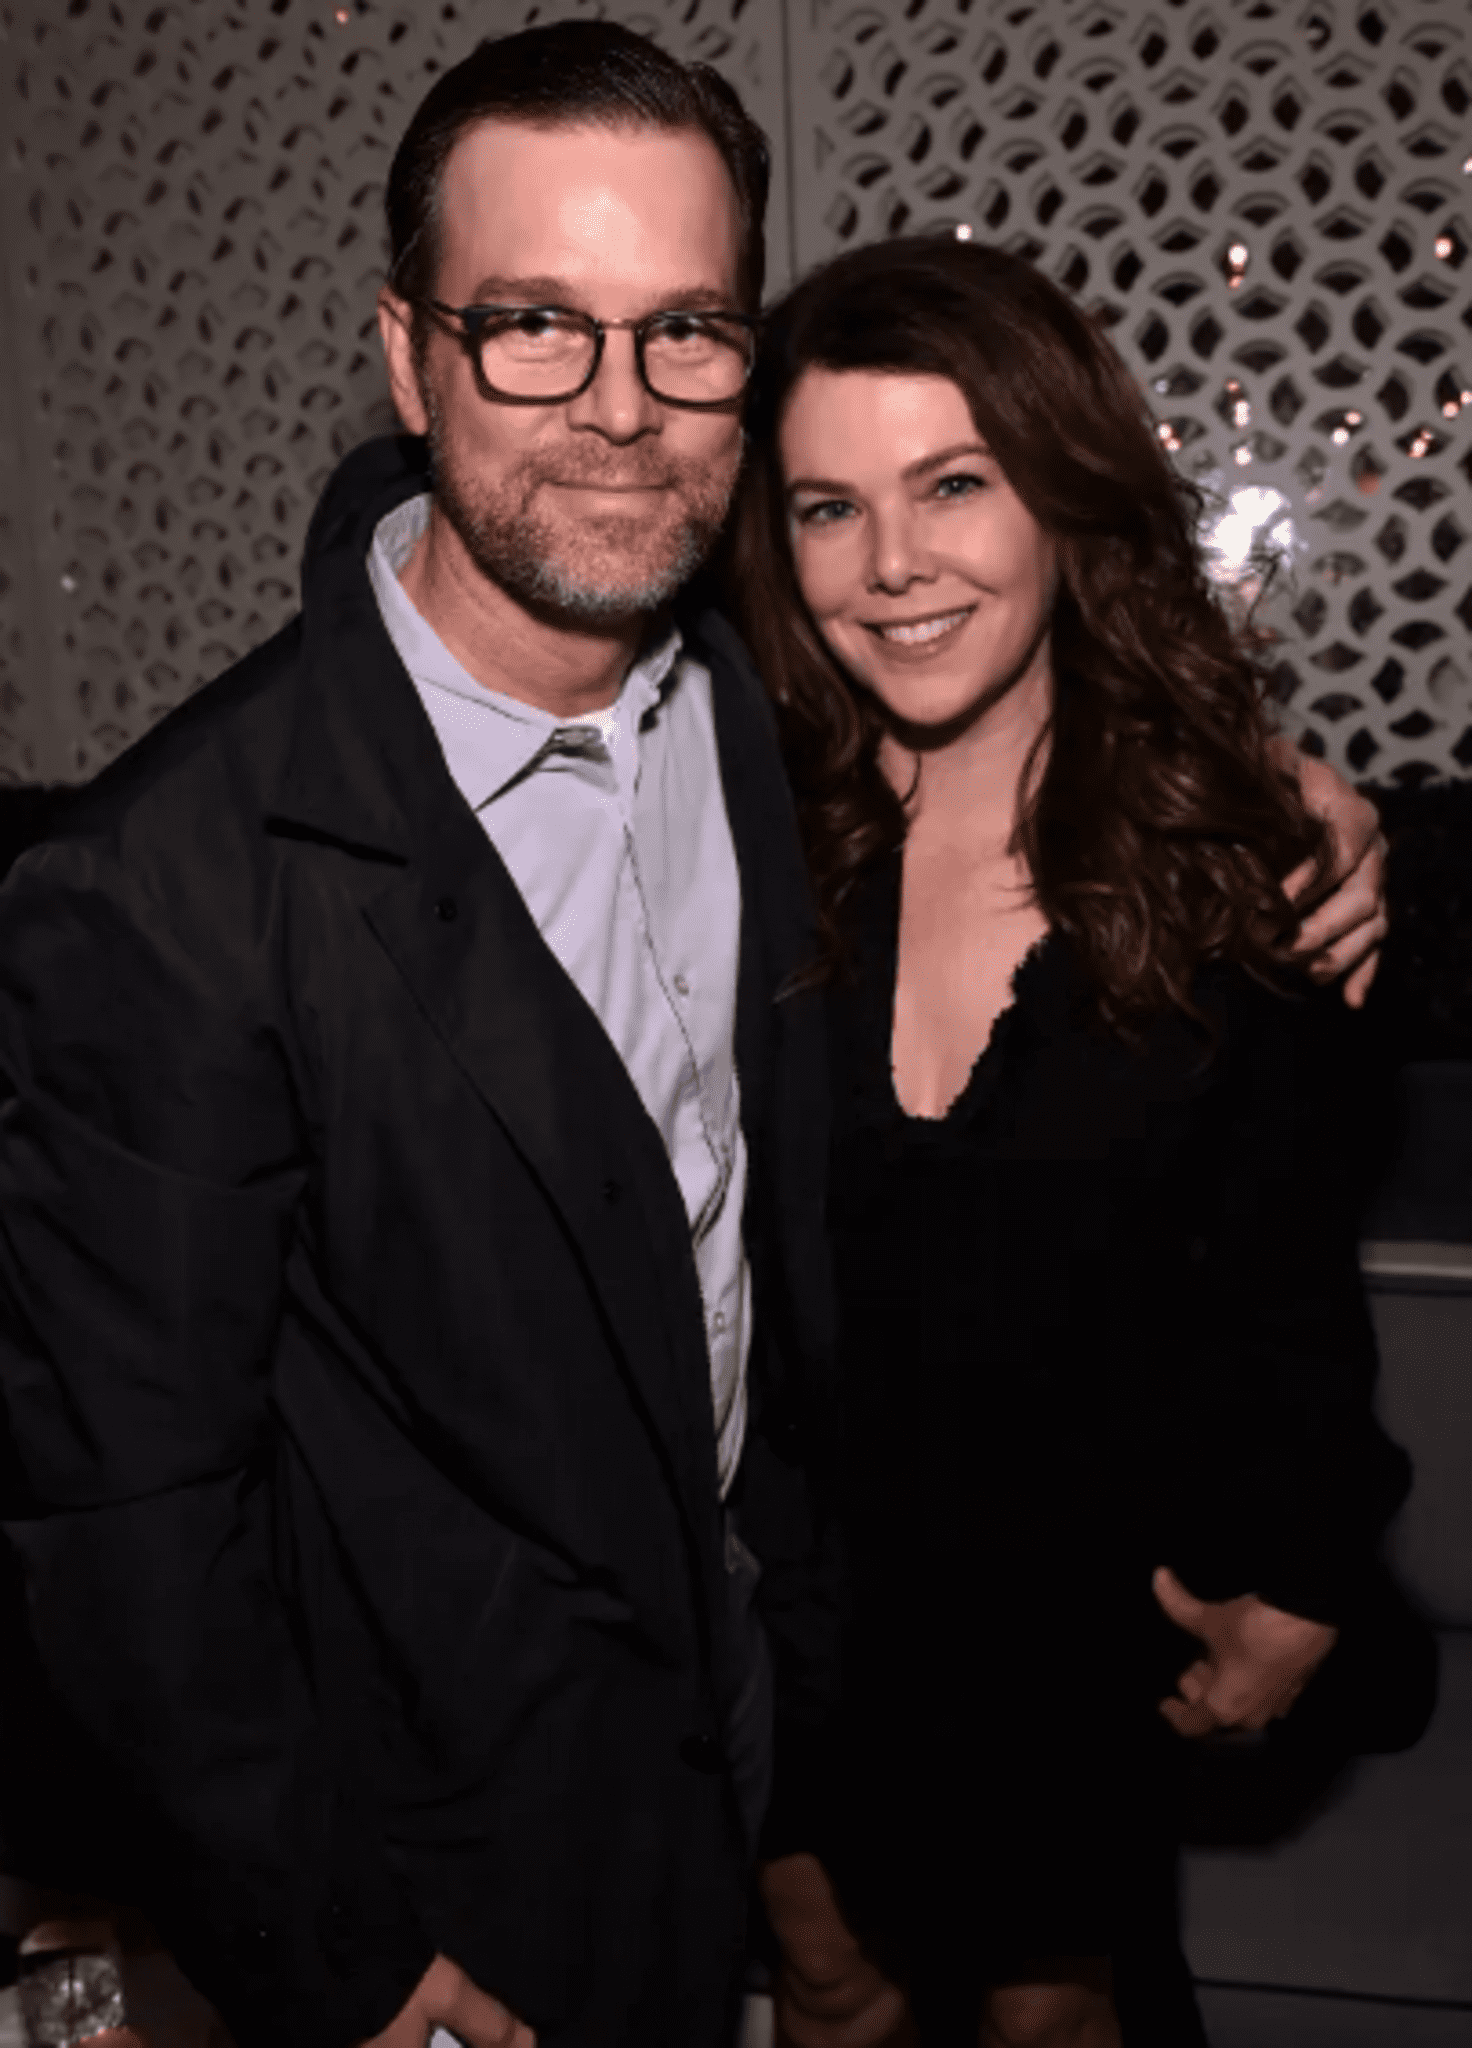 Before Things Really Got Going Between Them, Lauren Graham Didn’t Bother To Ask Peter Krause Any Serious Questions